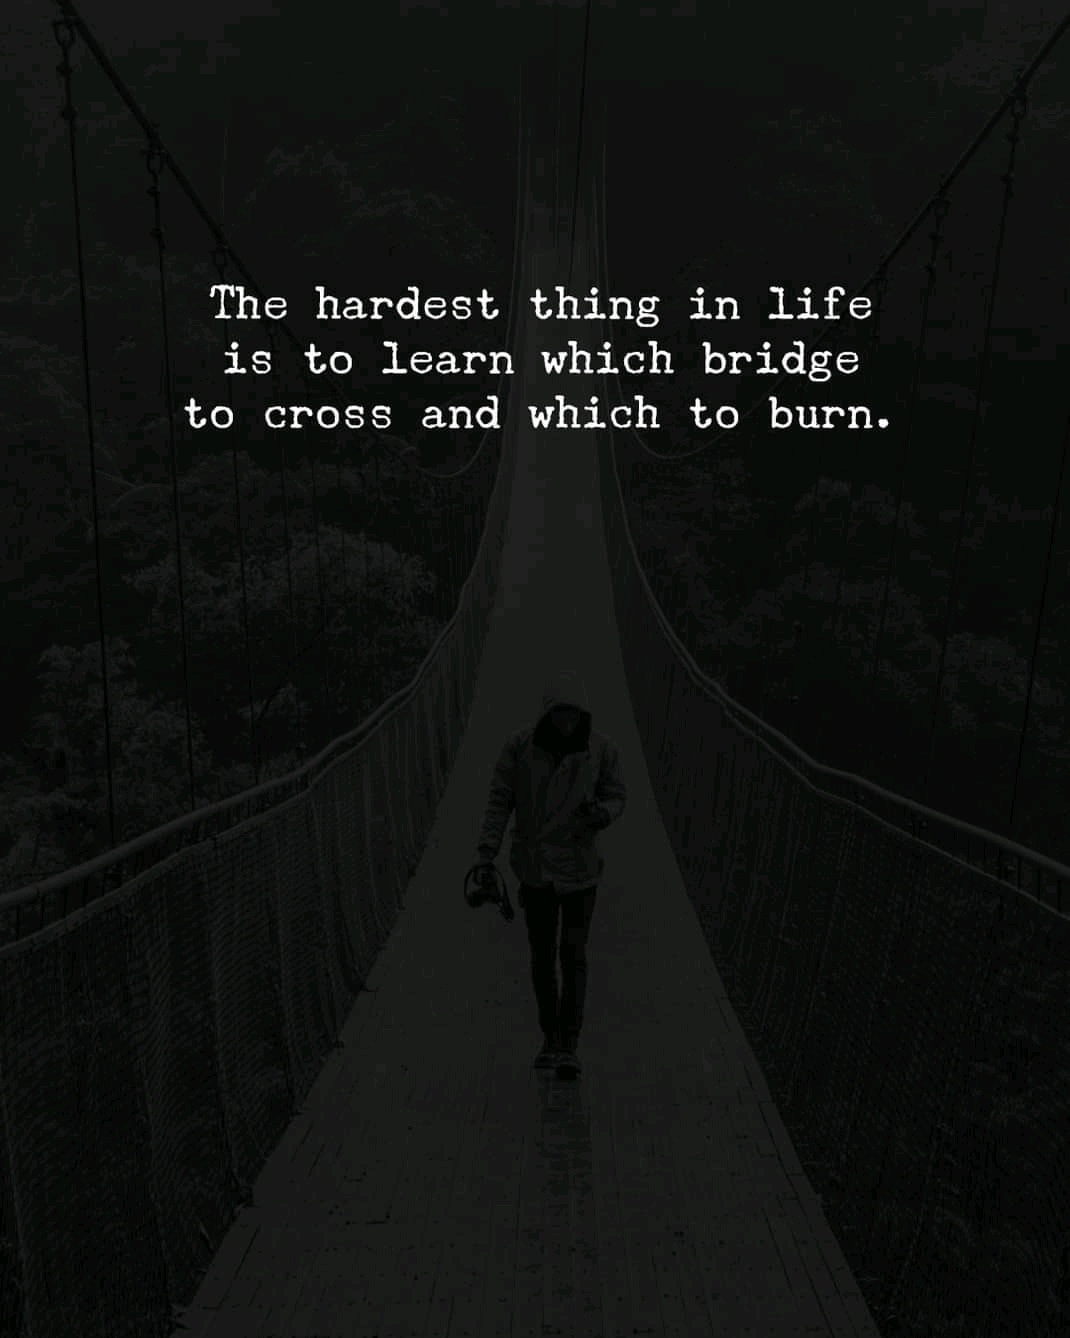 The hardest thing to learn in life is which bridge to cross and which to burn – Bertrand Russell.